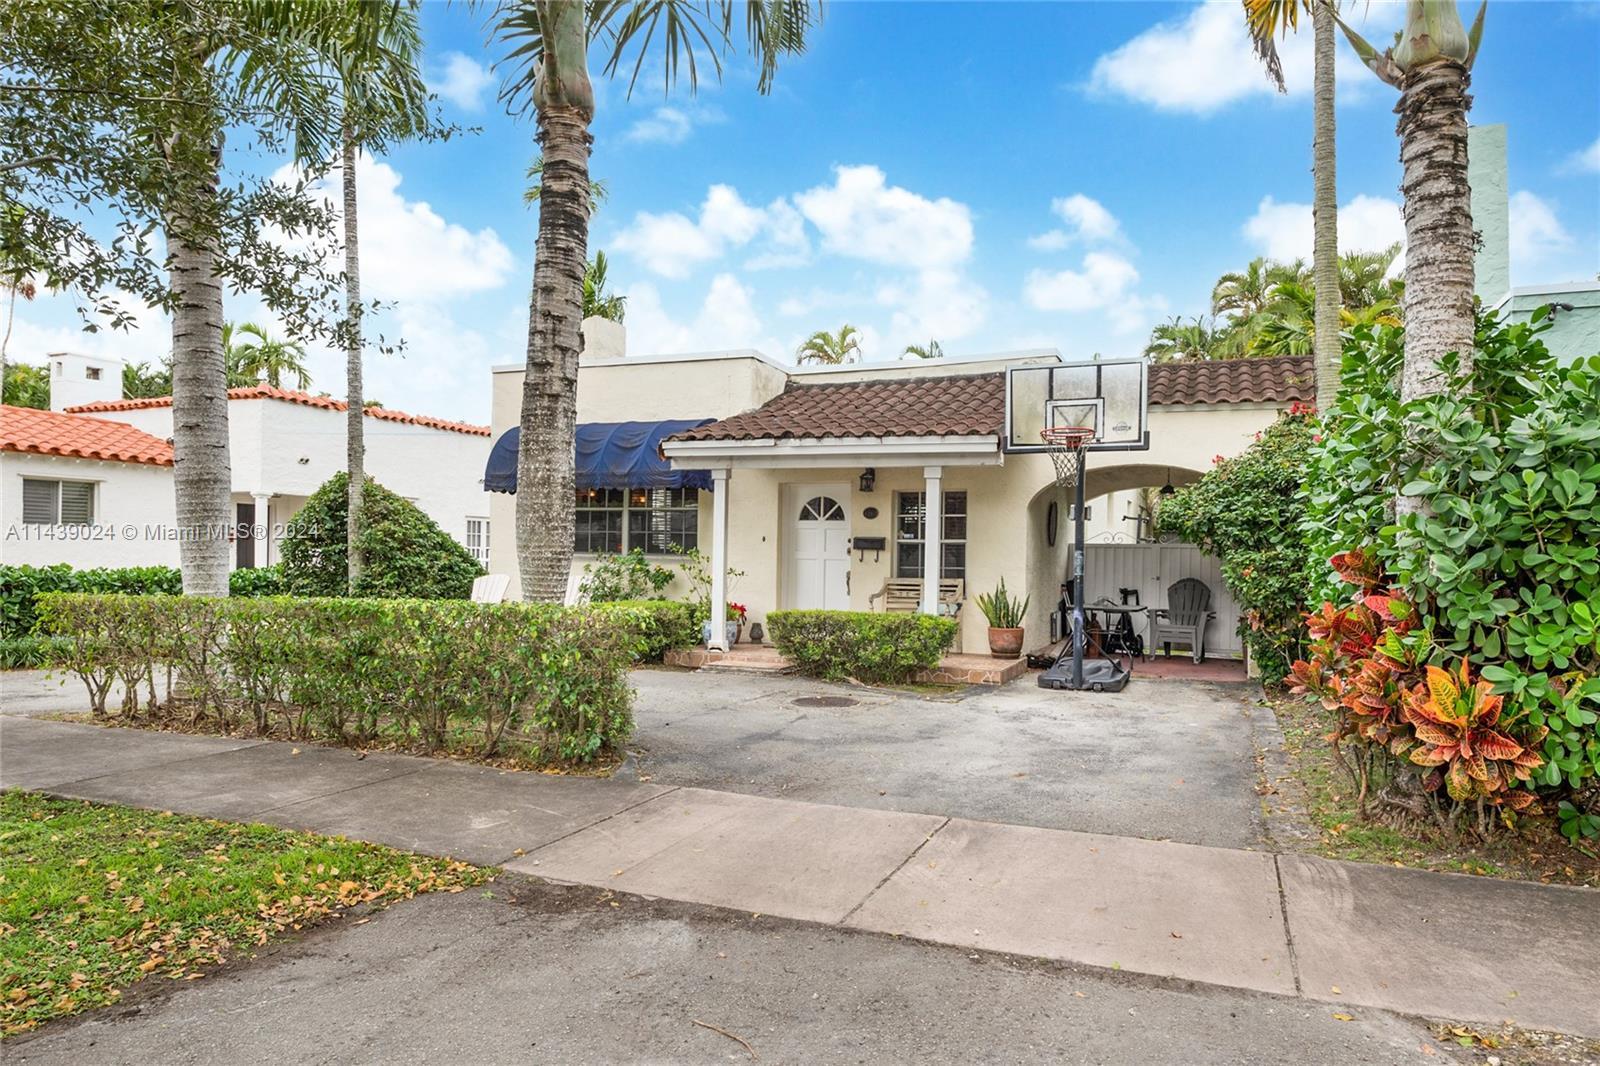 Wonderful 1925 home conveniently located on a quiet street in North Gables.  Loaded with charm, this